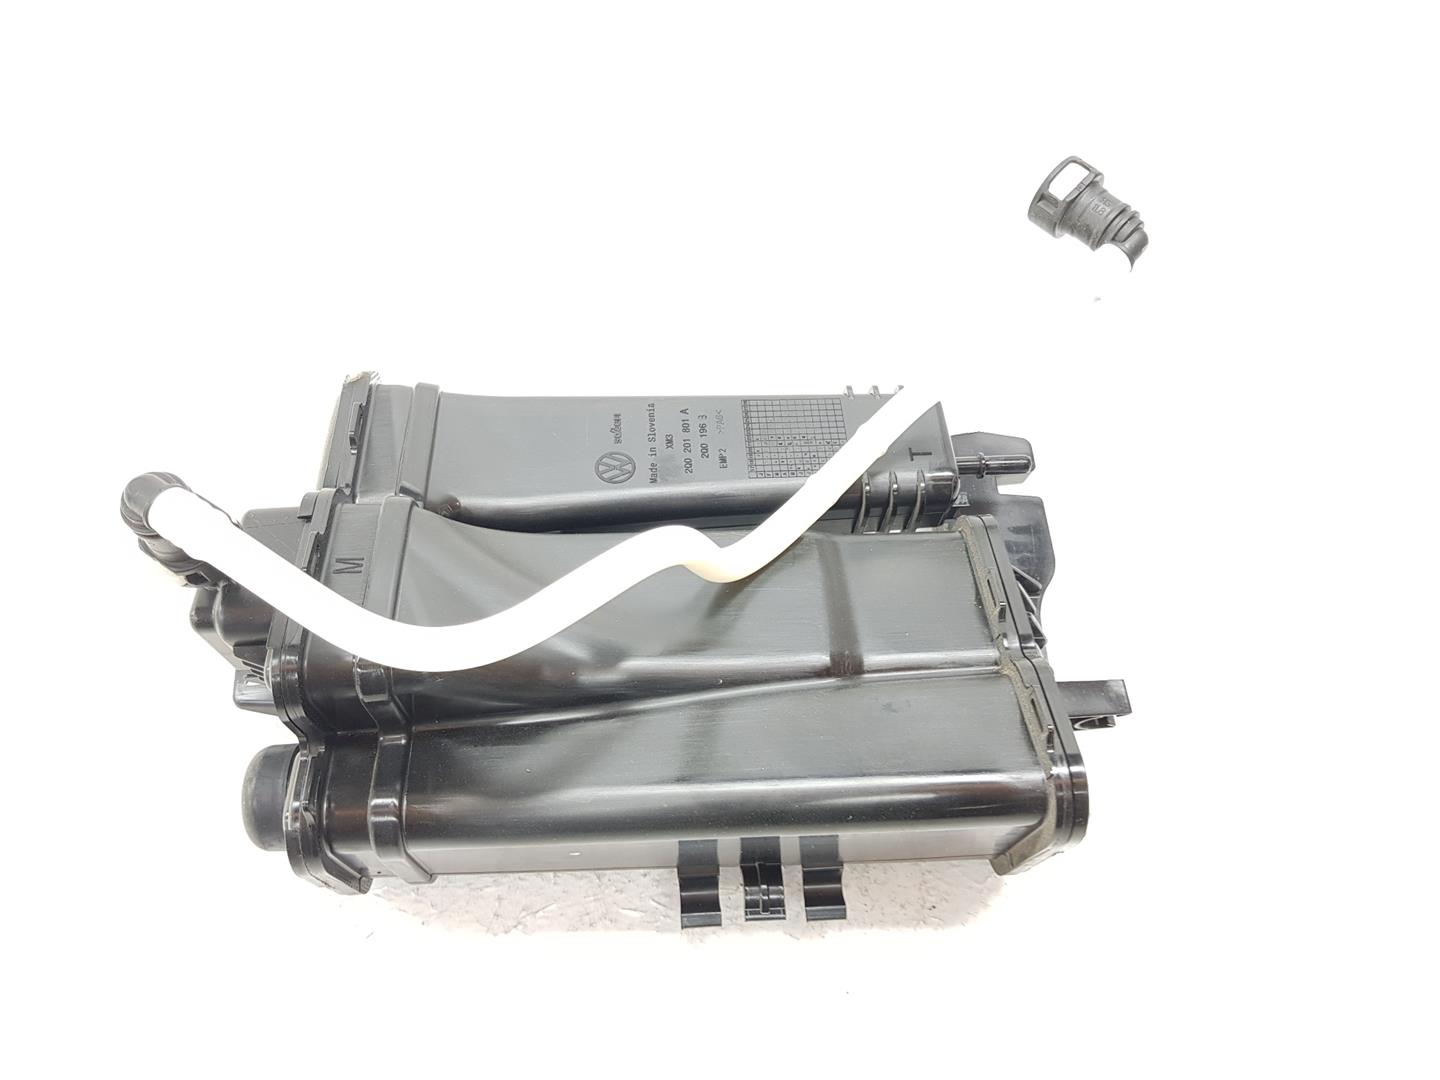 SEAT Alhambra 2 generation (2010-2021) Other Engine Compartment Parts 2Q0201801A, 2Q0201801A 21583005